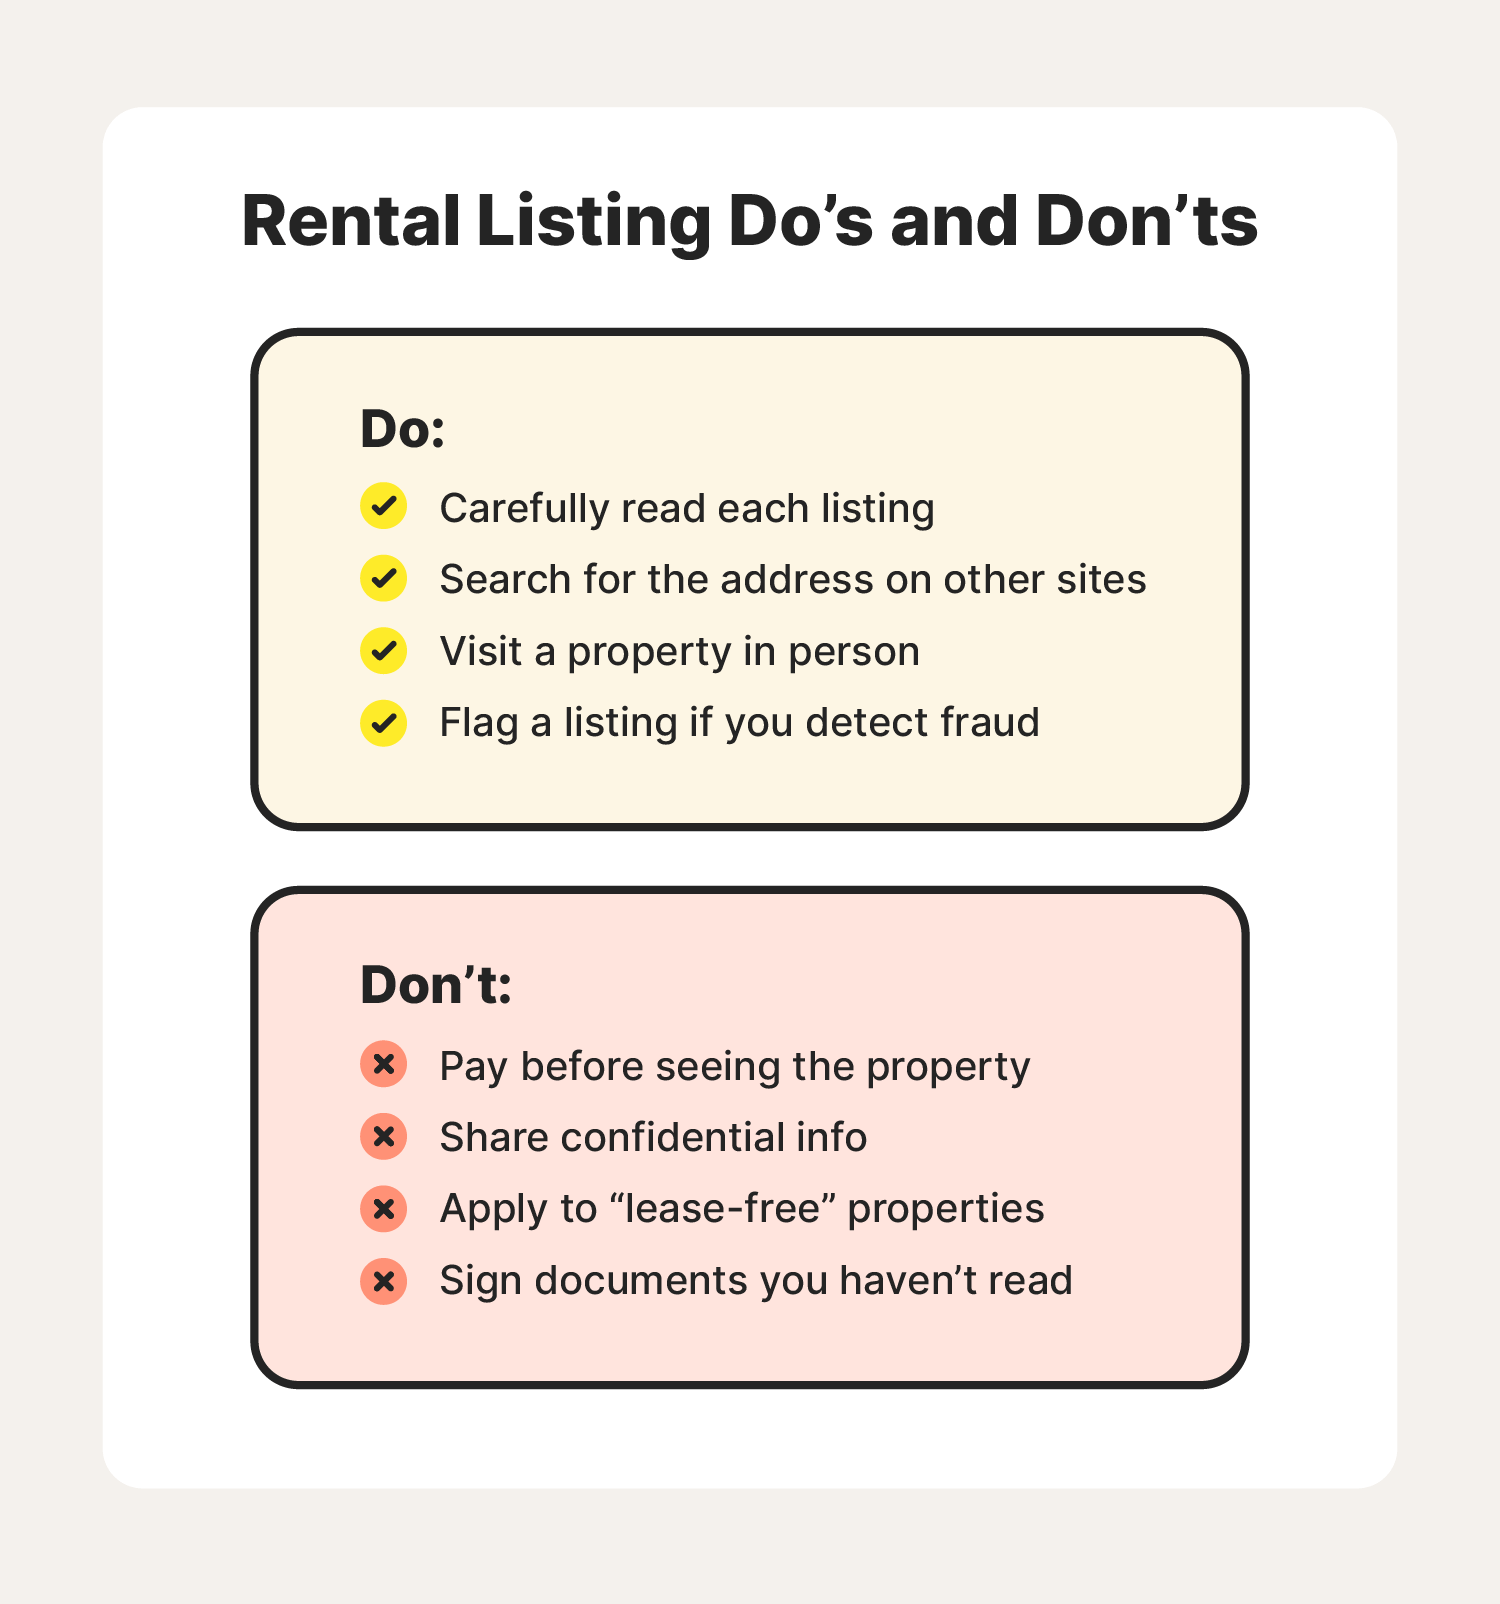 Two text boxes display the do’s and don’ts of dealing with rental listings, helping inform how to avoid rental scams.